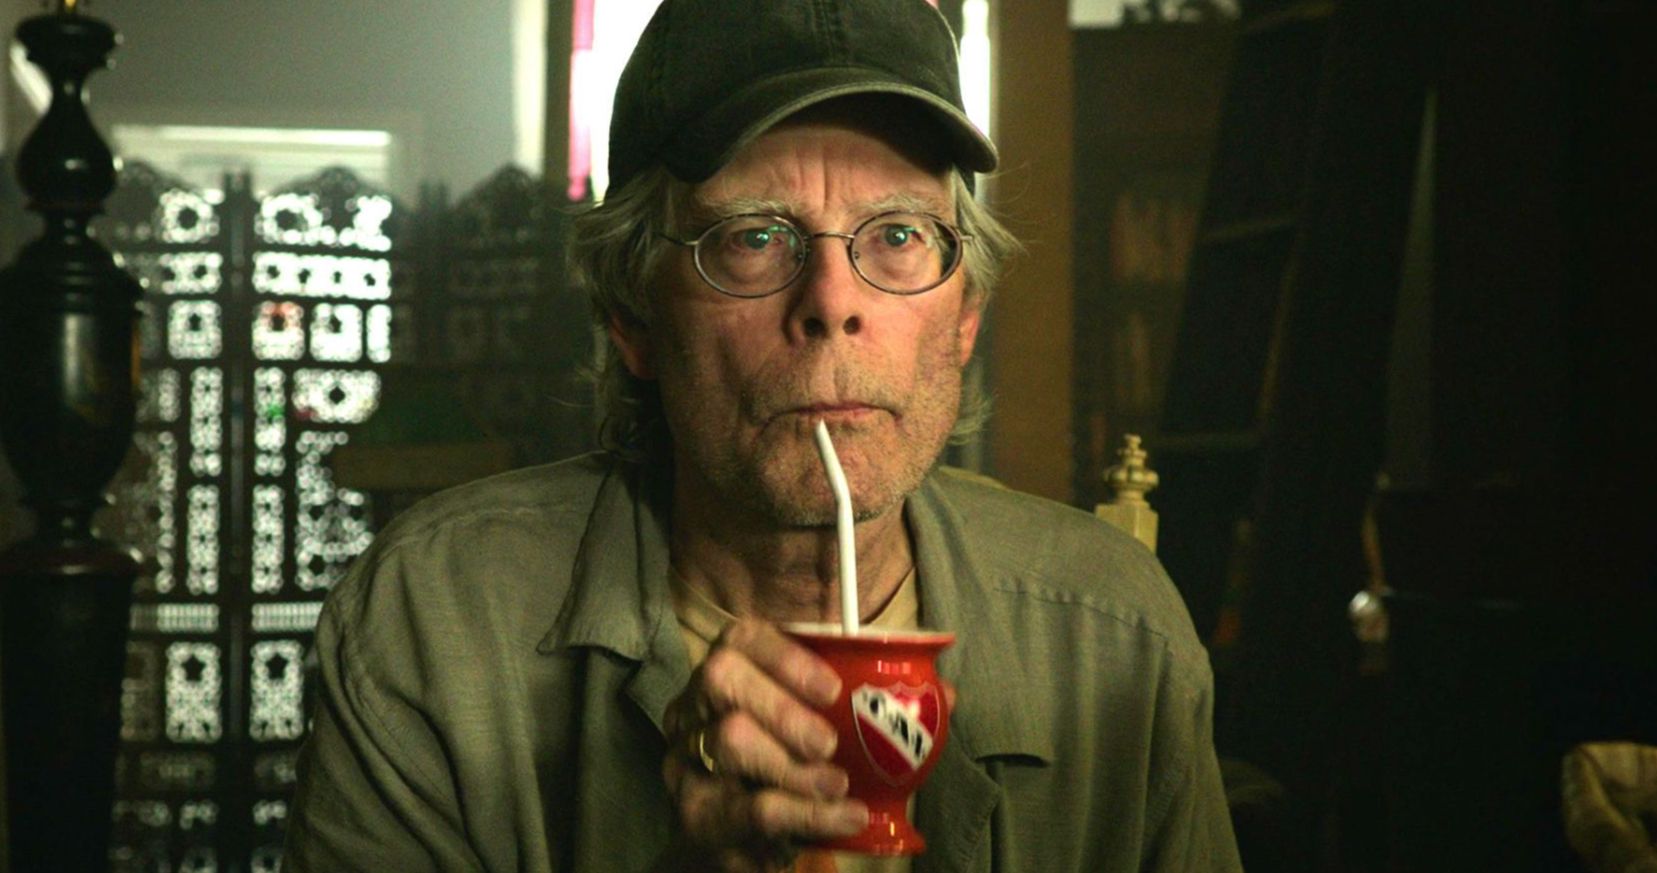 The Horror Movie Even Stephen King Turned Off Because It Was Just Too Freaky